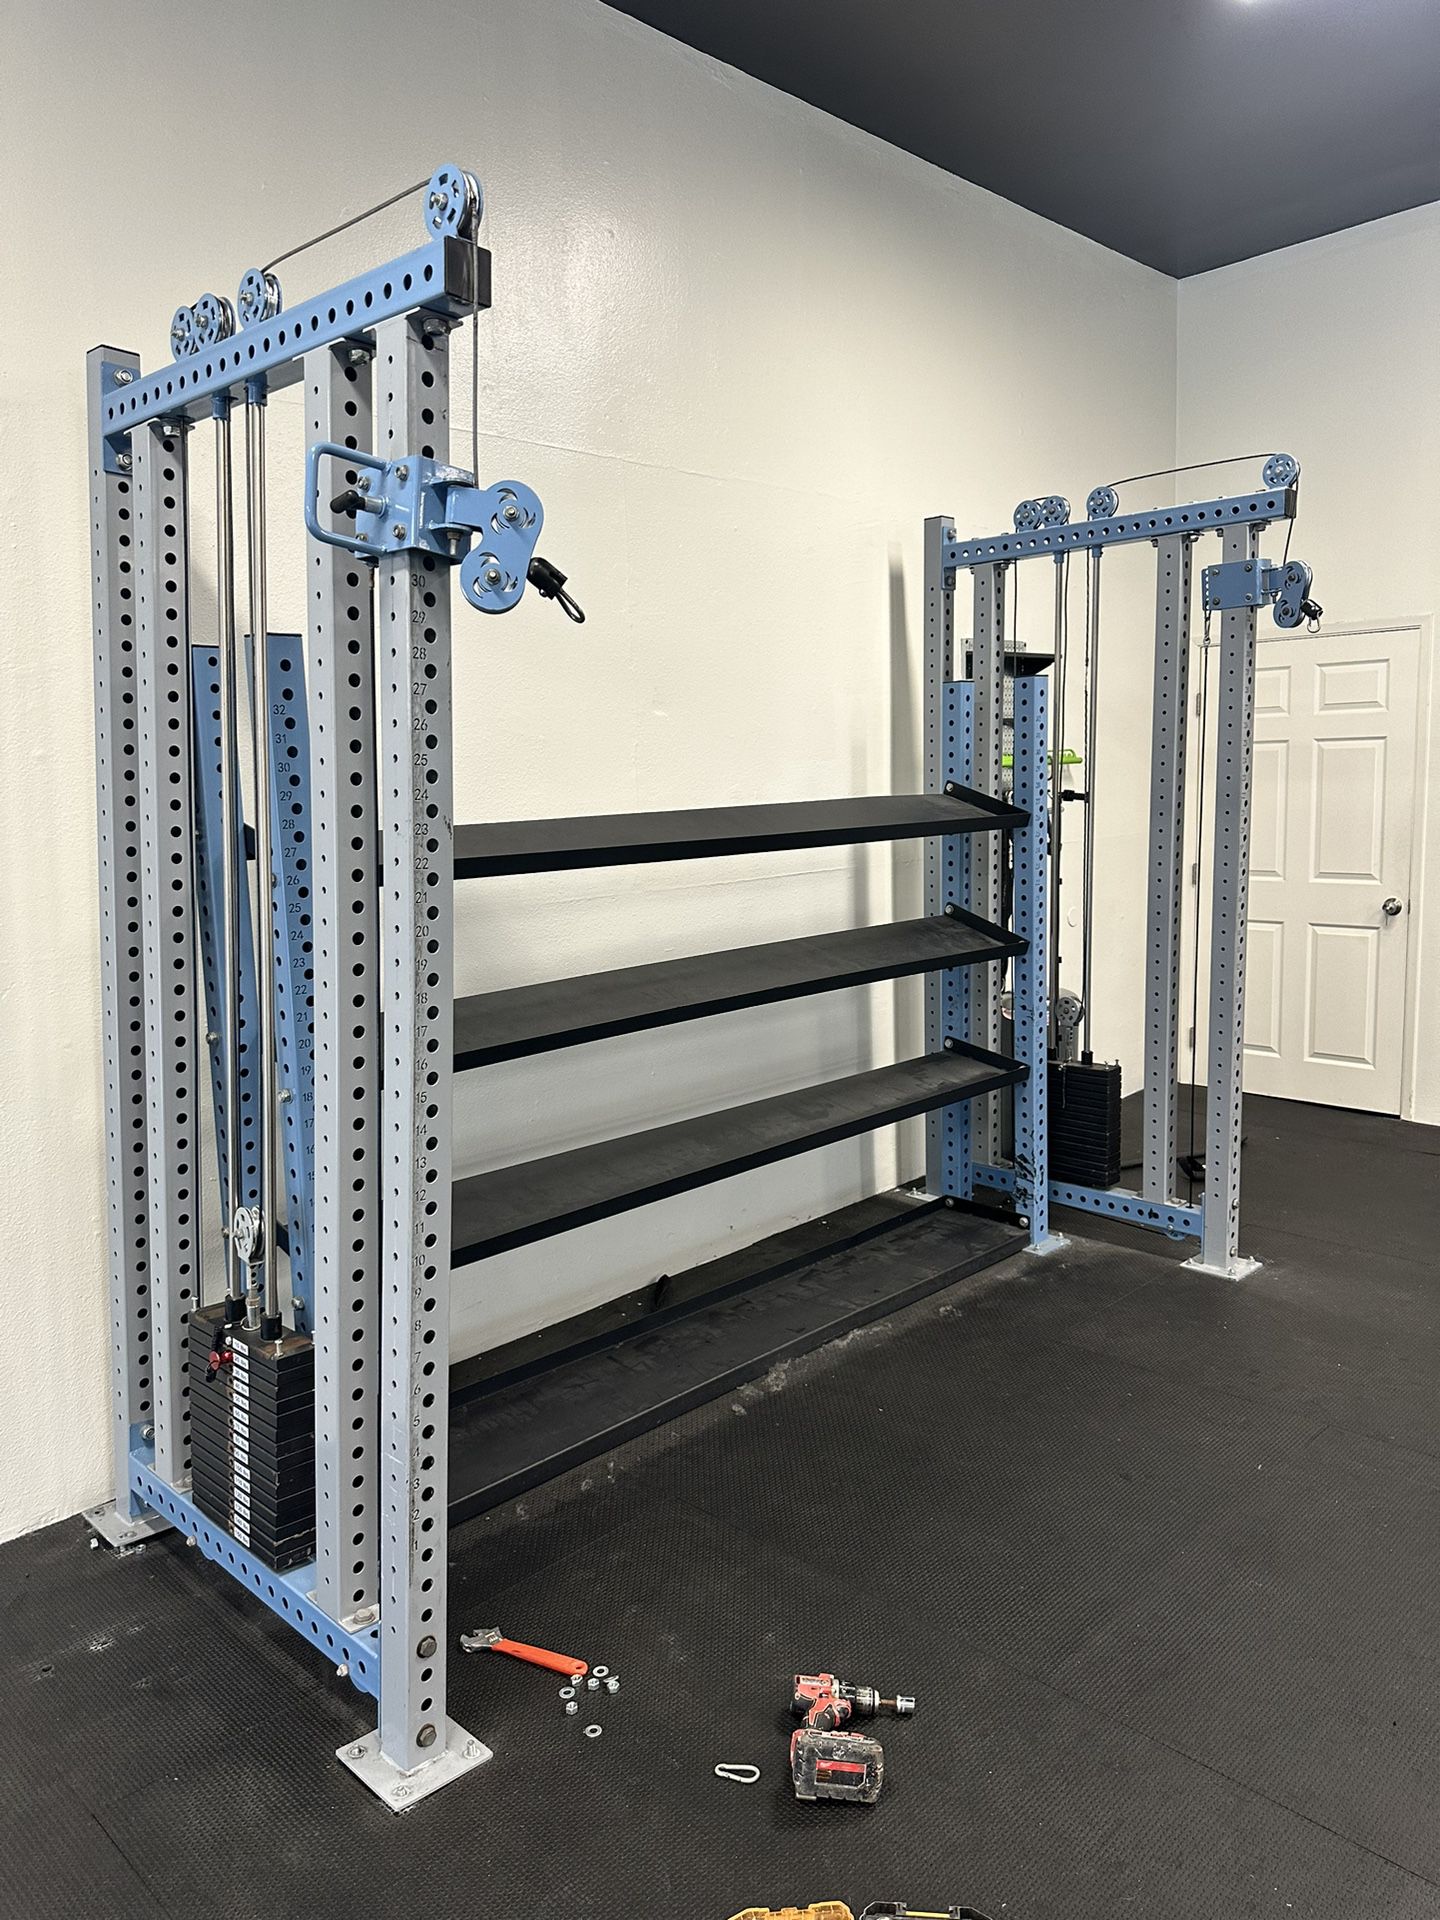 Cable Exercise Machines 